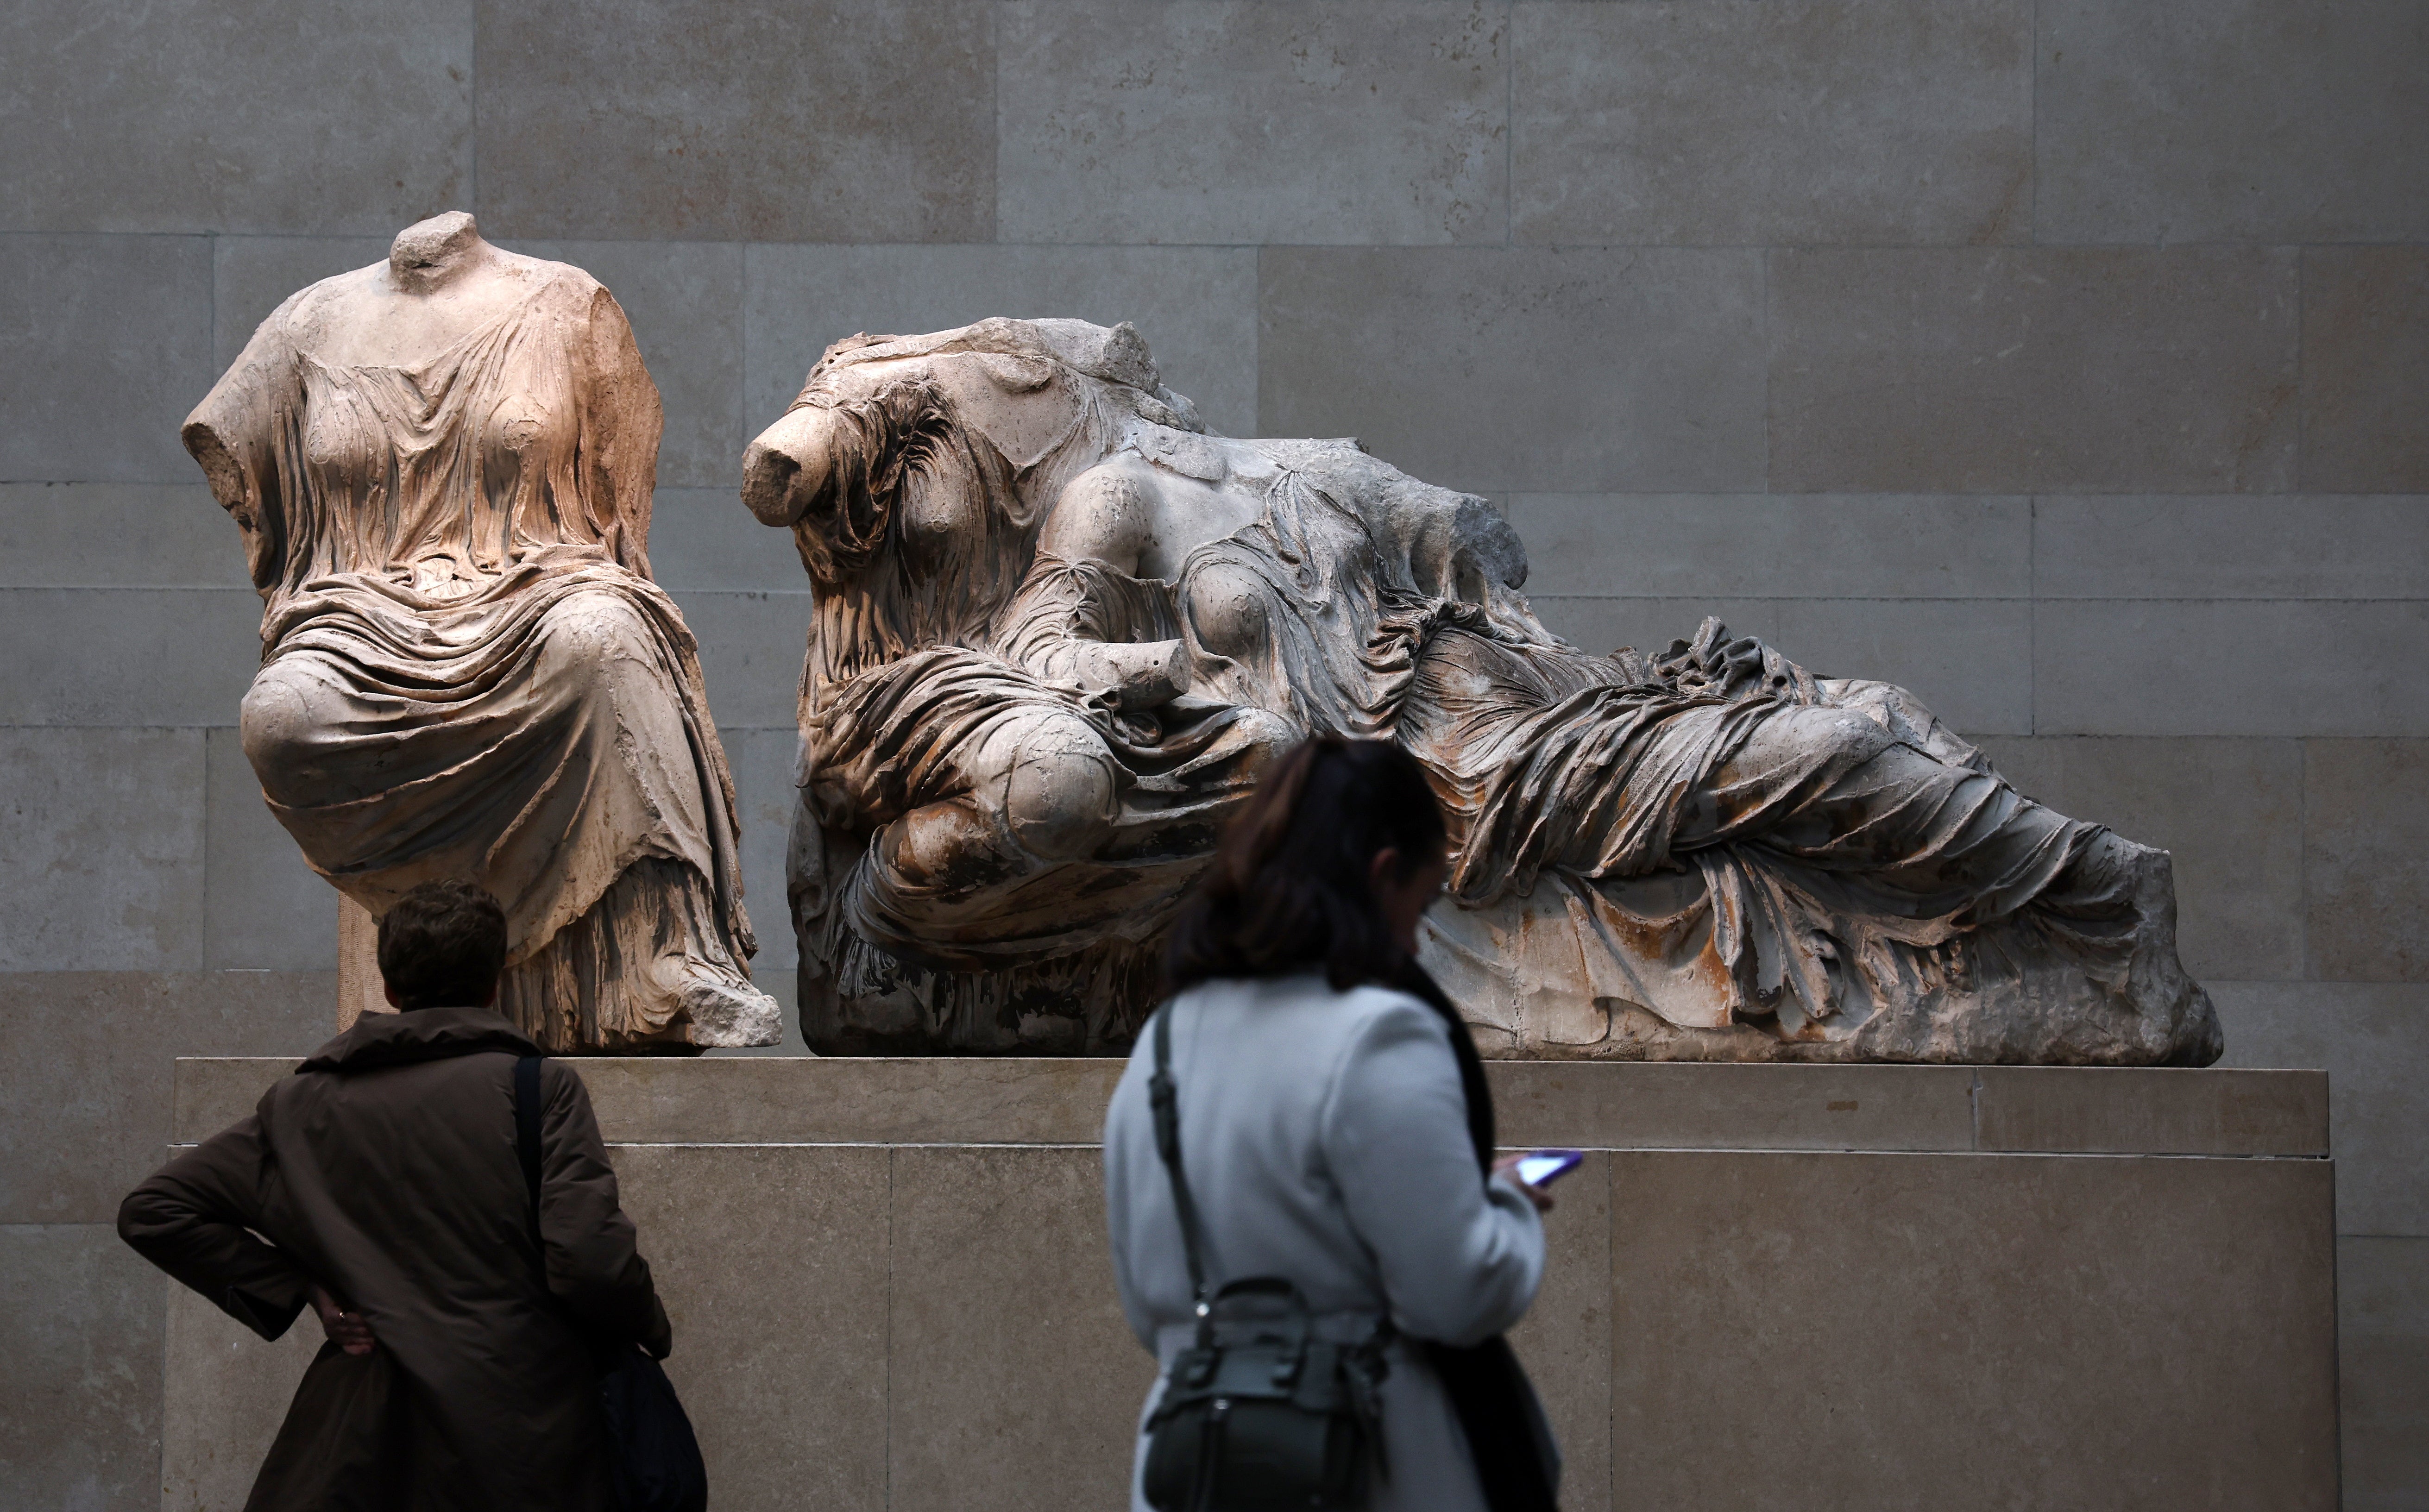 The treasures are one of the most famous and controversial displays at the British Museum in London